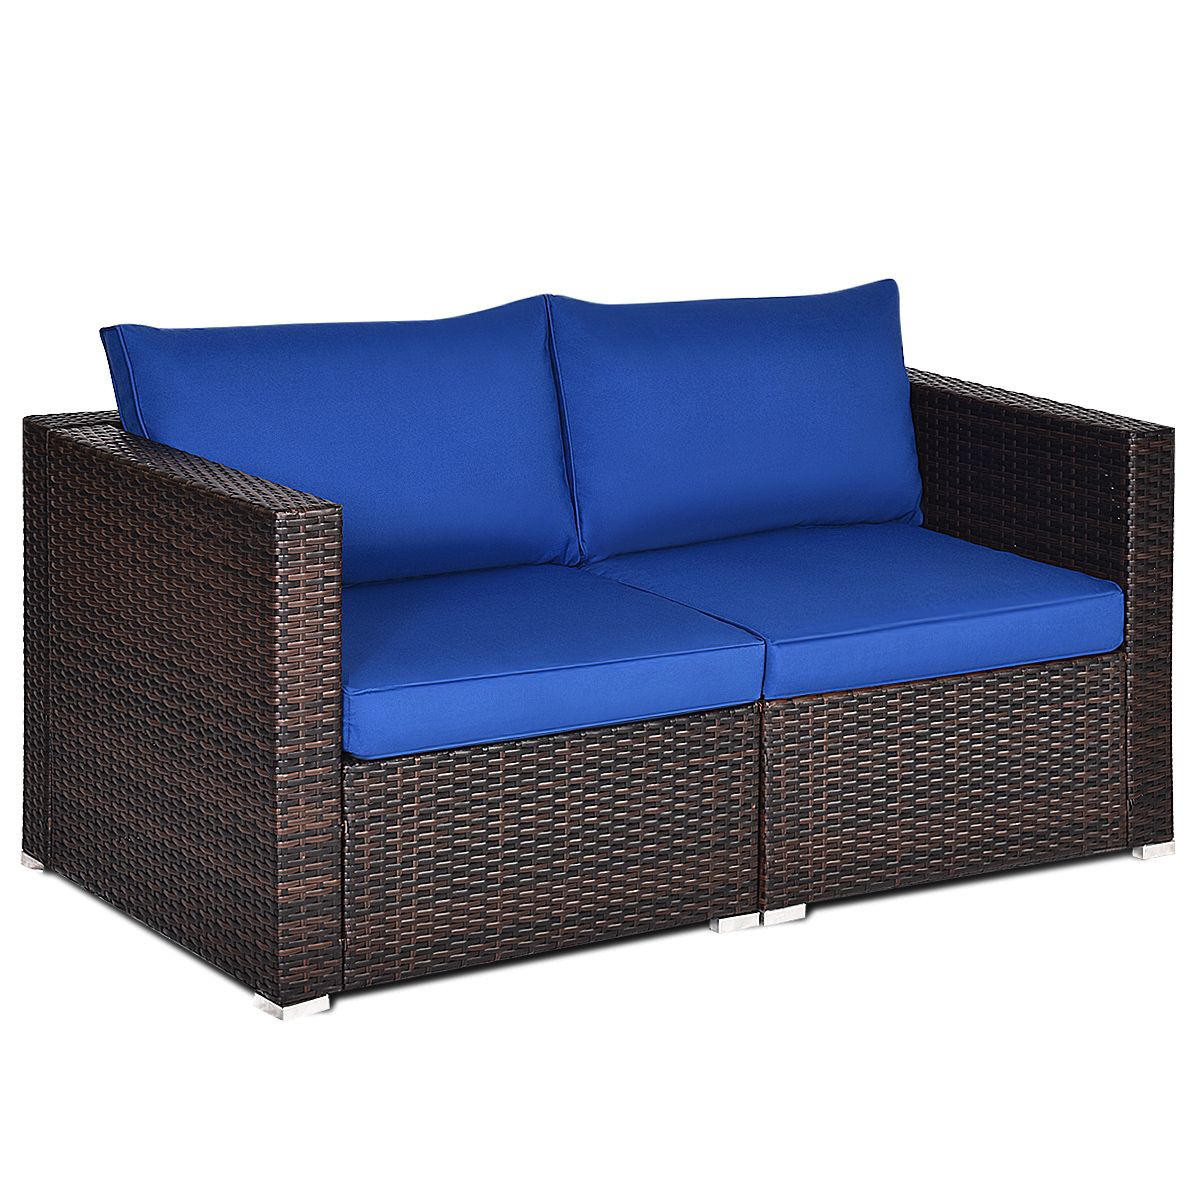 Most Recently Released Patiojoy 2 Piece Patio Wicker Corner Sofa Set Rattan Loveseat With Inside 2 Piece Outdoor Wicker Sectional Sofa Sets (View 7 of 15)